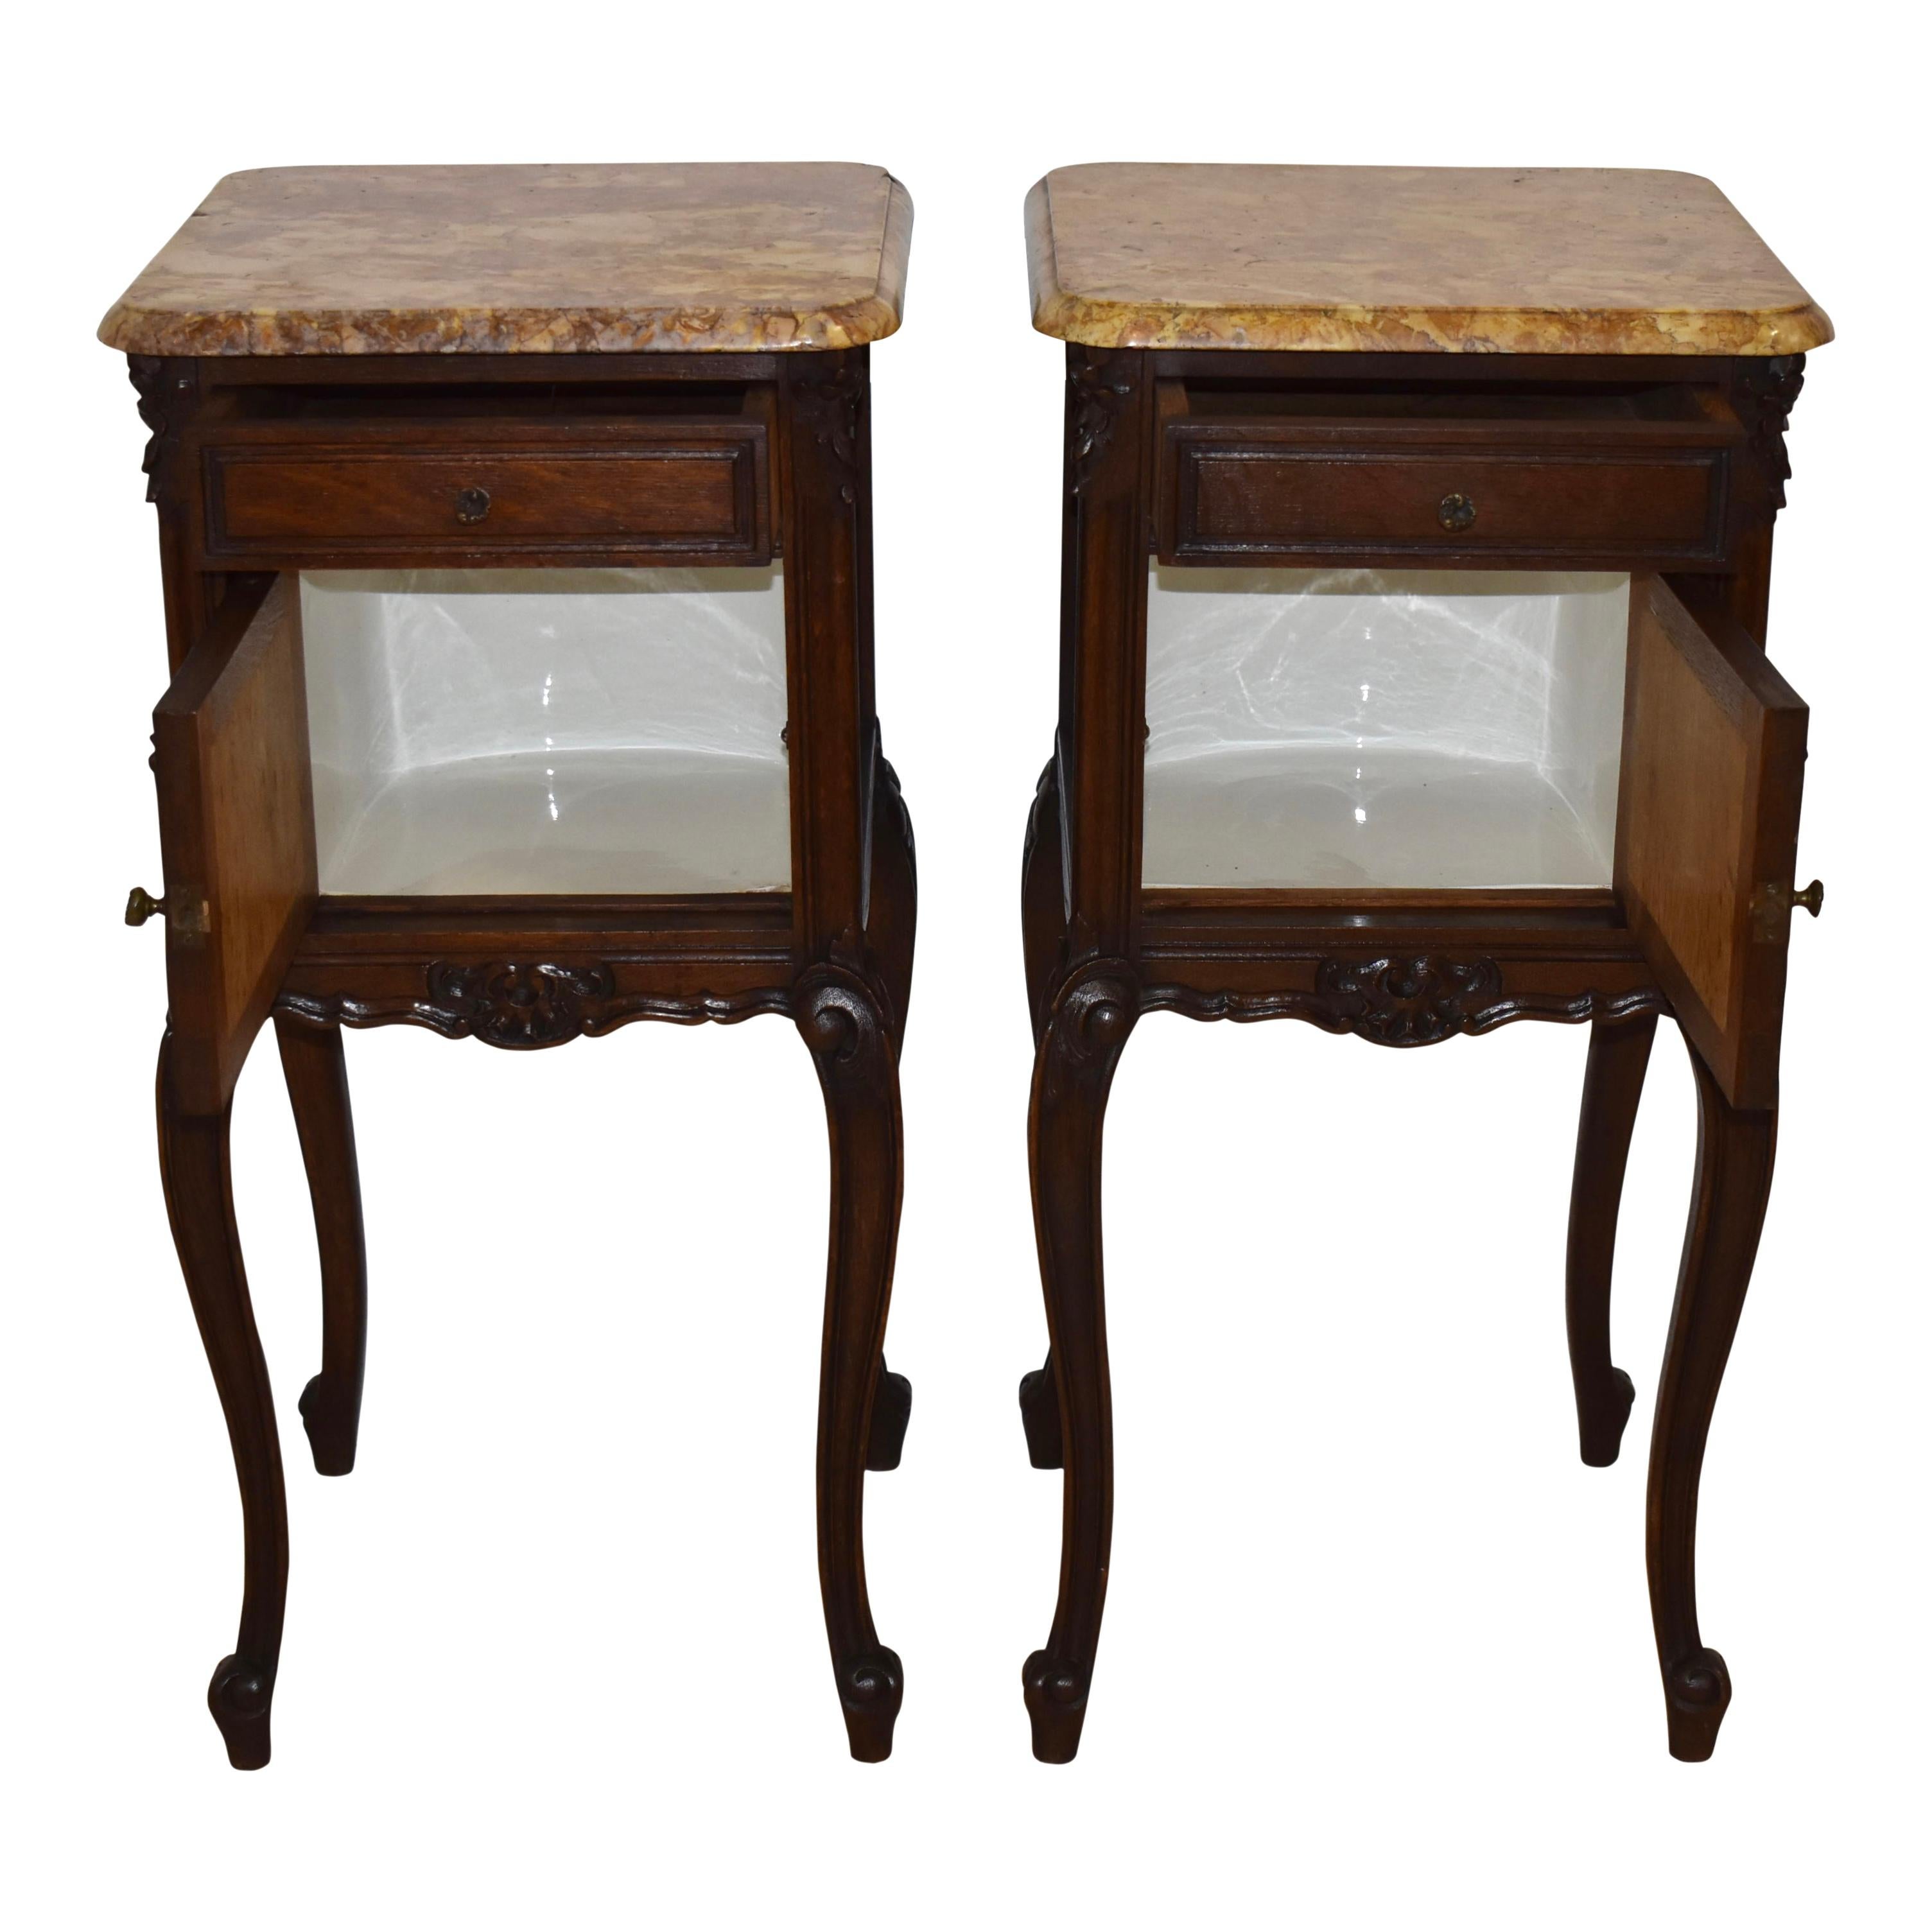 This beautiful set of nightstands pairs oak frames finished with a rich, dark stain and marble tops, showcasing gold, cream, and tan tones. The nightstands date back to the years when a bedside table's purpose was to provided storage for a chamber